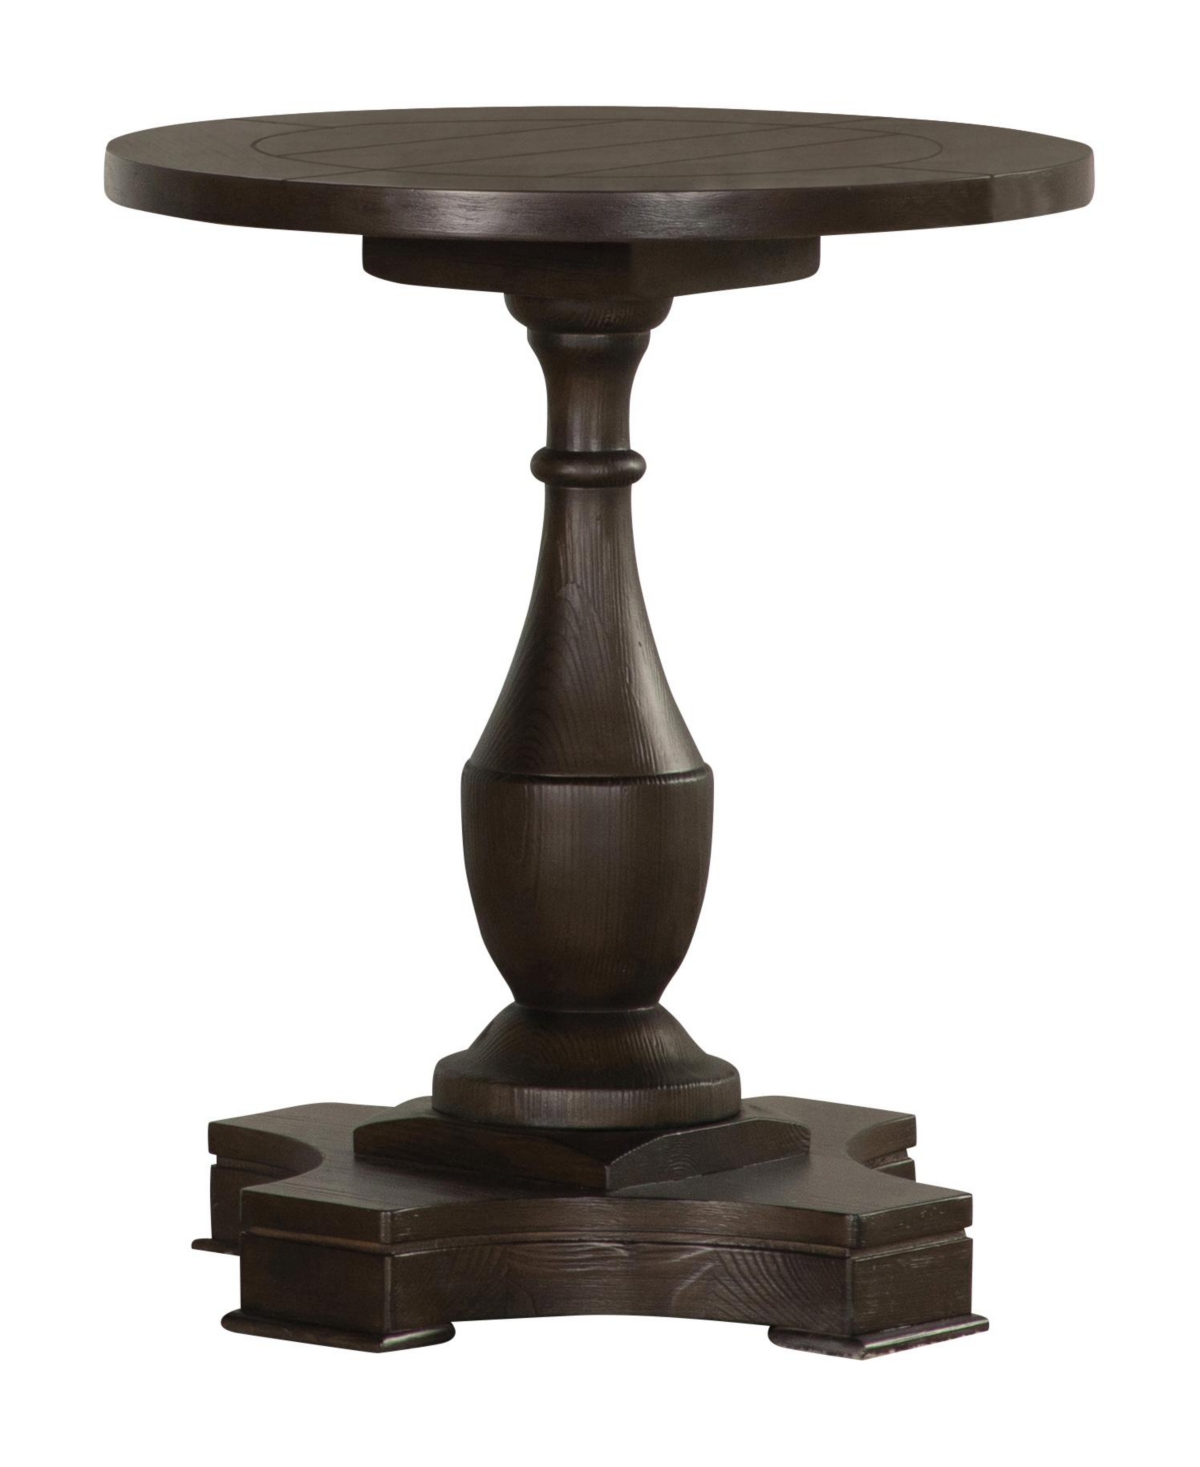 Coaster Home Furnishings 23.75" Medium Density Fiberboard Round End Table With Pedestal Base In Coffee